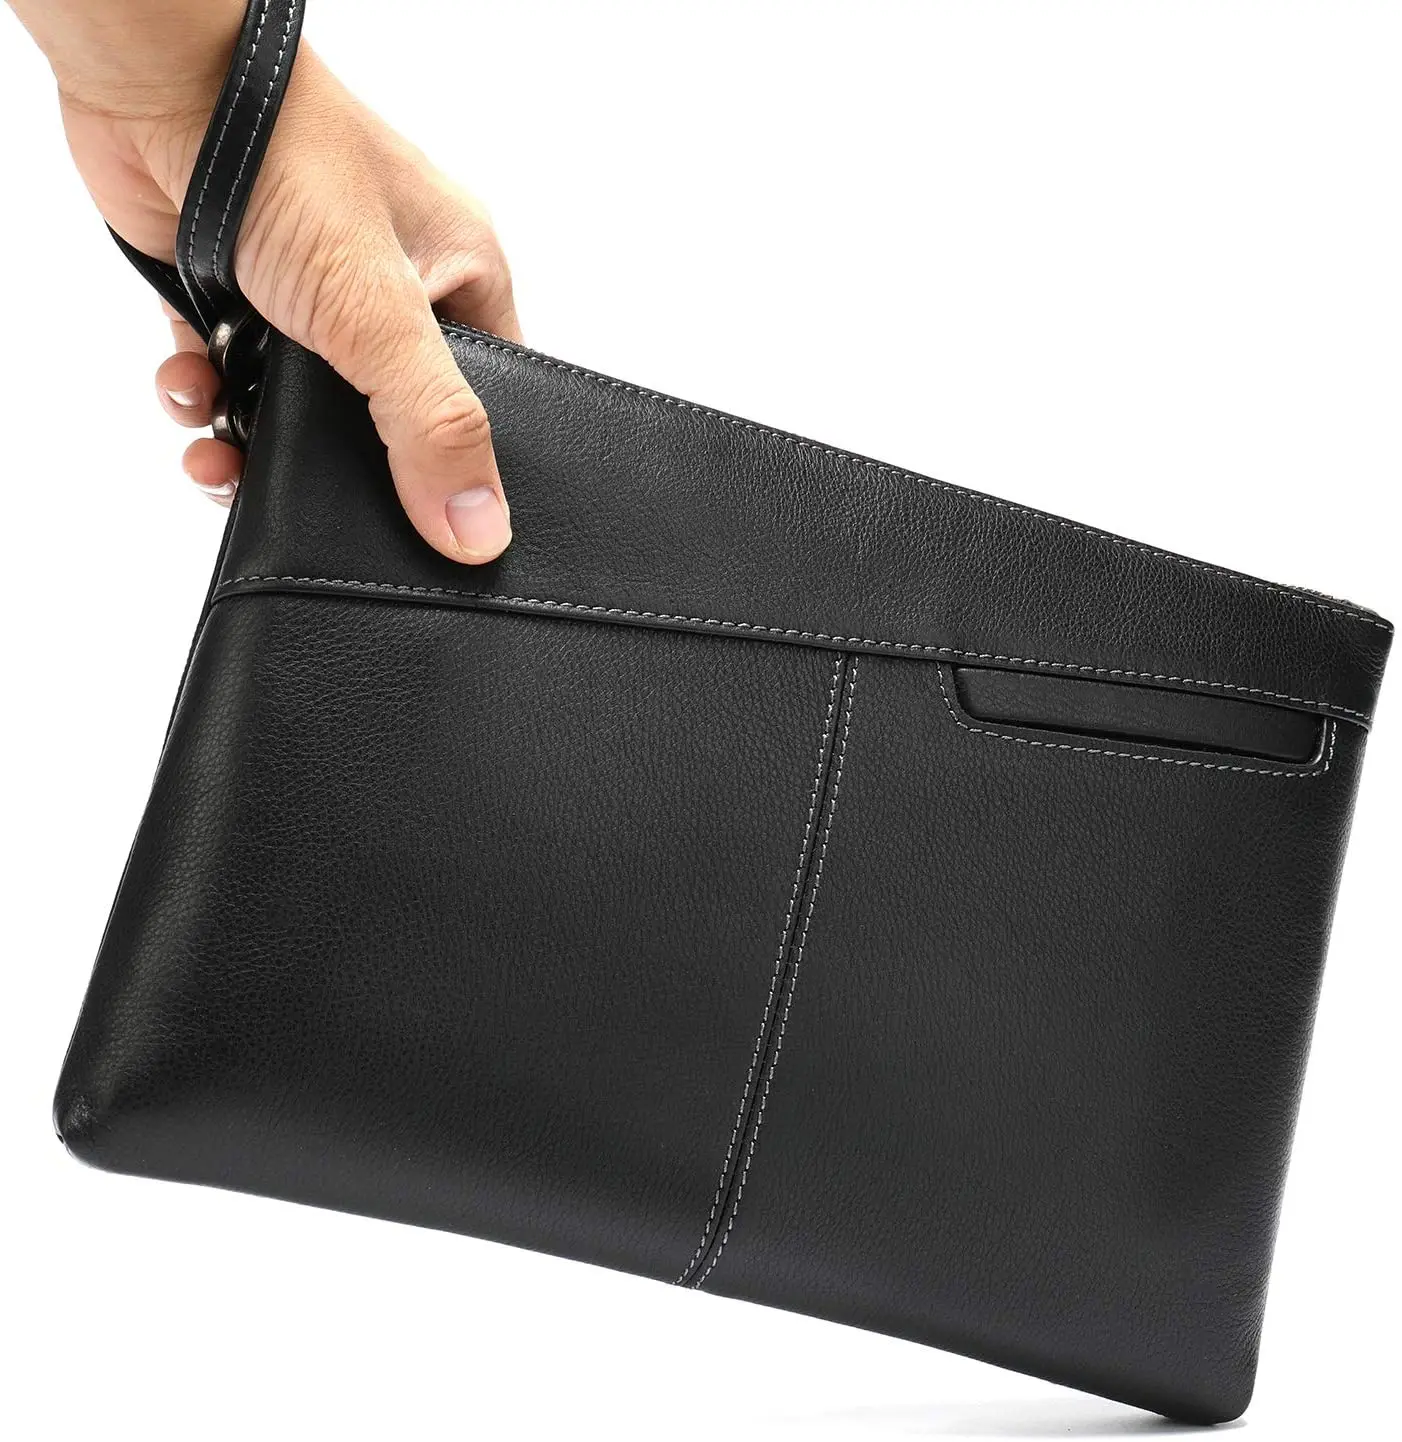 one last coin falls from a purse into a man's hand, a crisis 23146153 Stock  Photo at Vecteezy